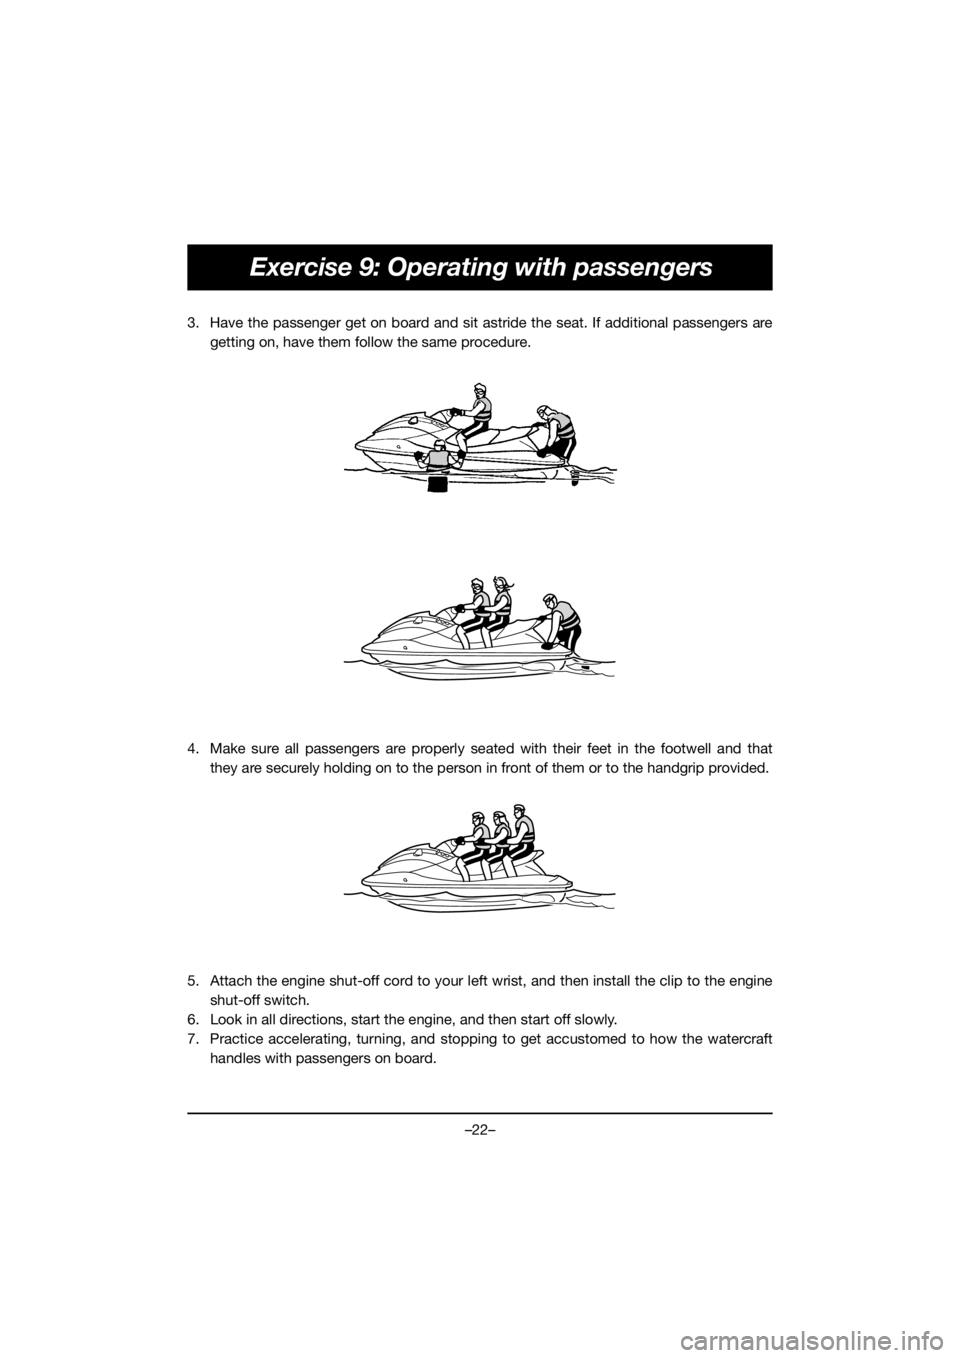 YAMAHA EXR 2020  Notices Demploi (in French) –22–
Exercise 9: Operating with passengers
3. Have the passenger get on board and sit astride the seat. If additional passengers are
getting on, have them follow the same procedure. 
4. Make sure 